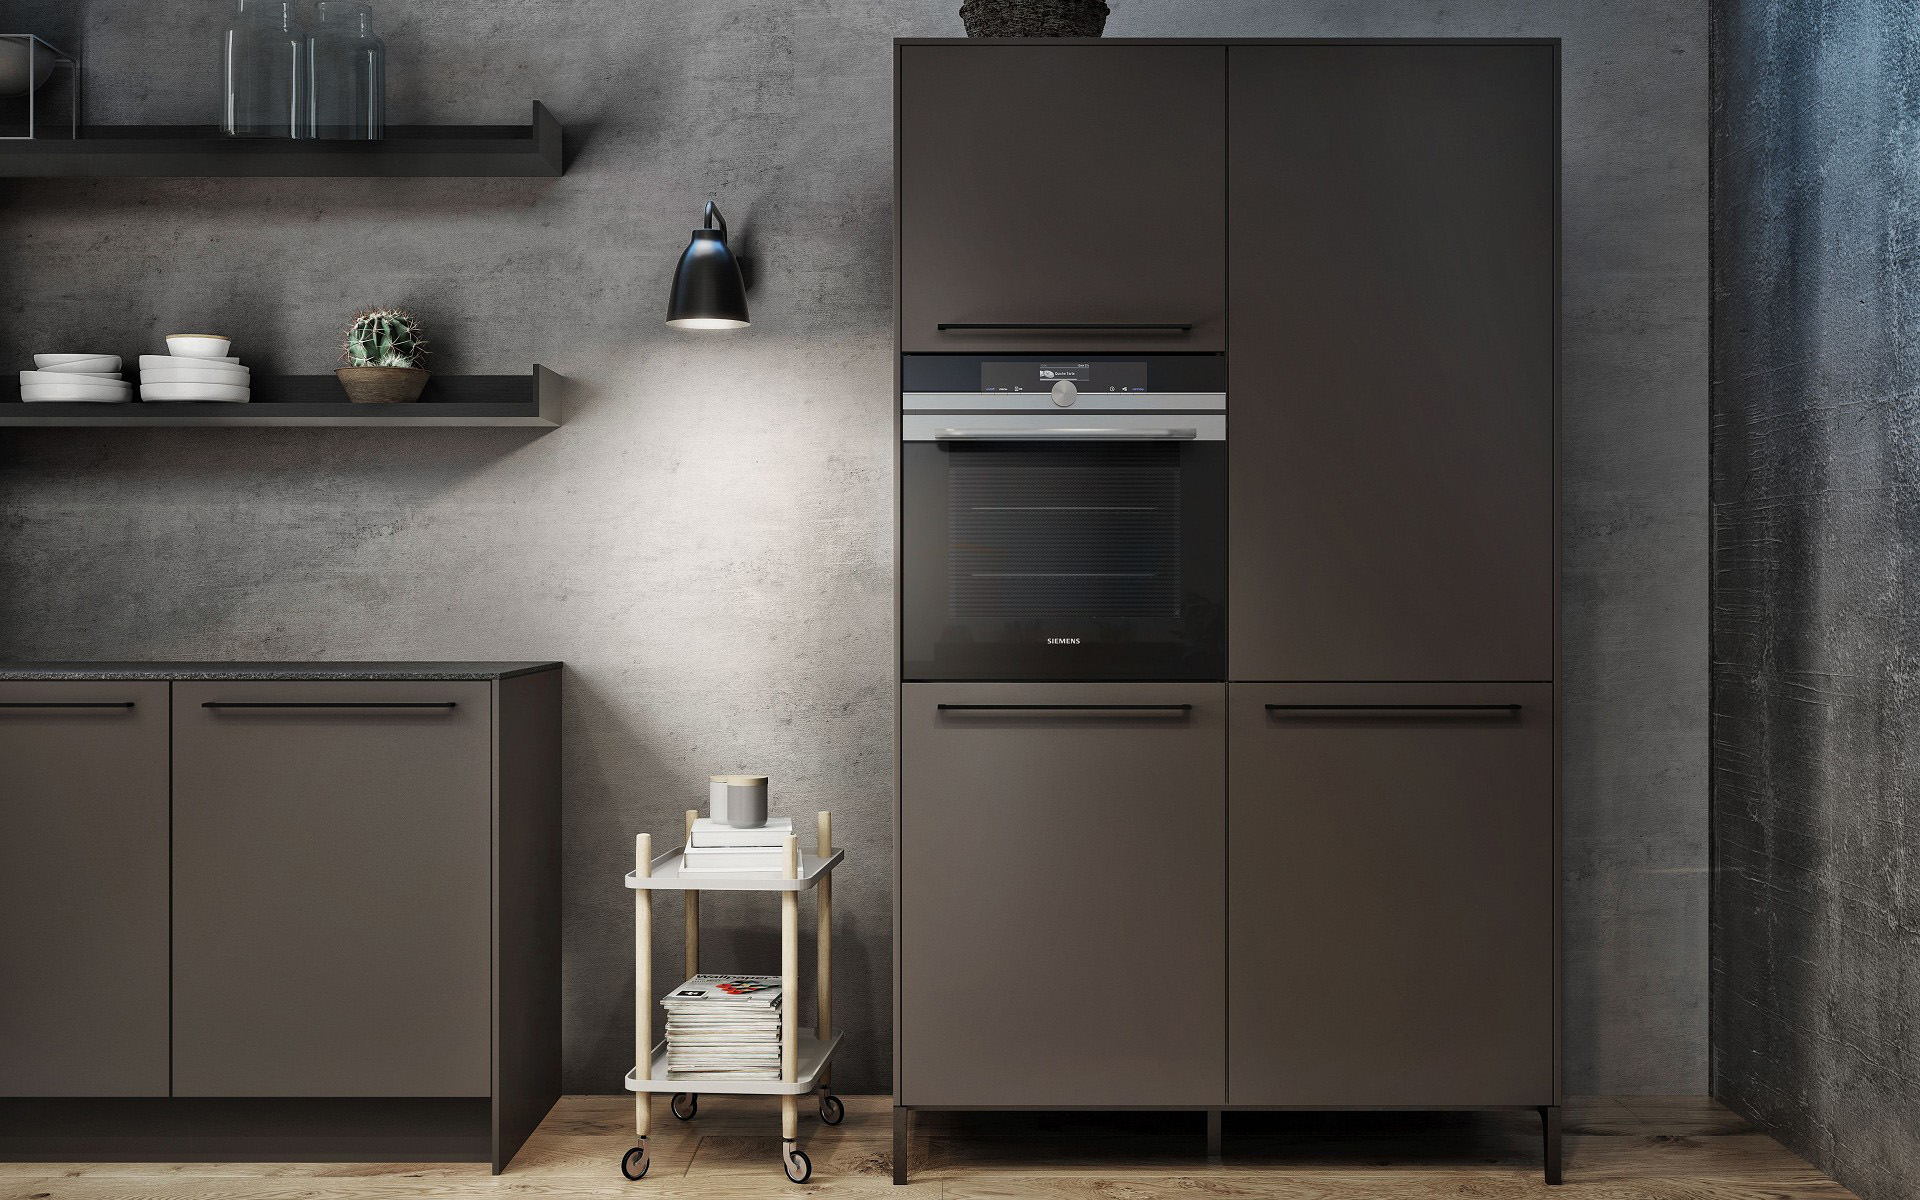 Freestanding tall cabinet in umbra with oven is a functional addition to urban design with SieMatic 29